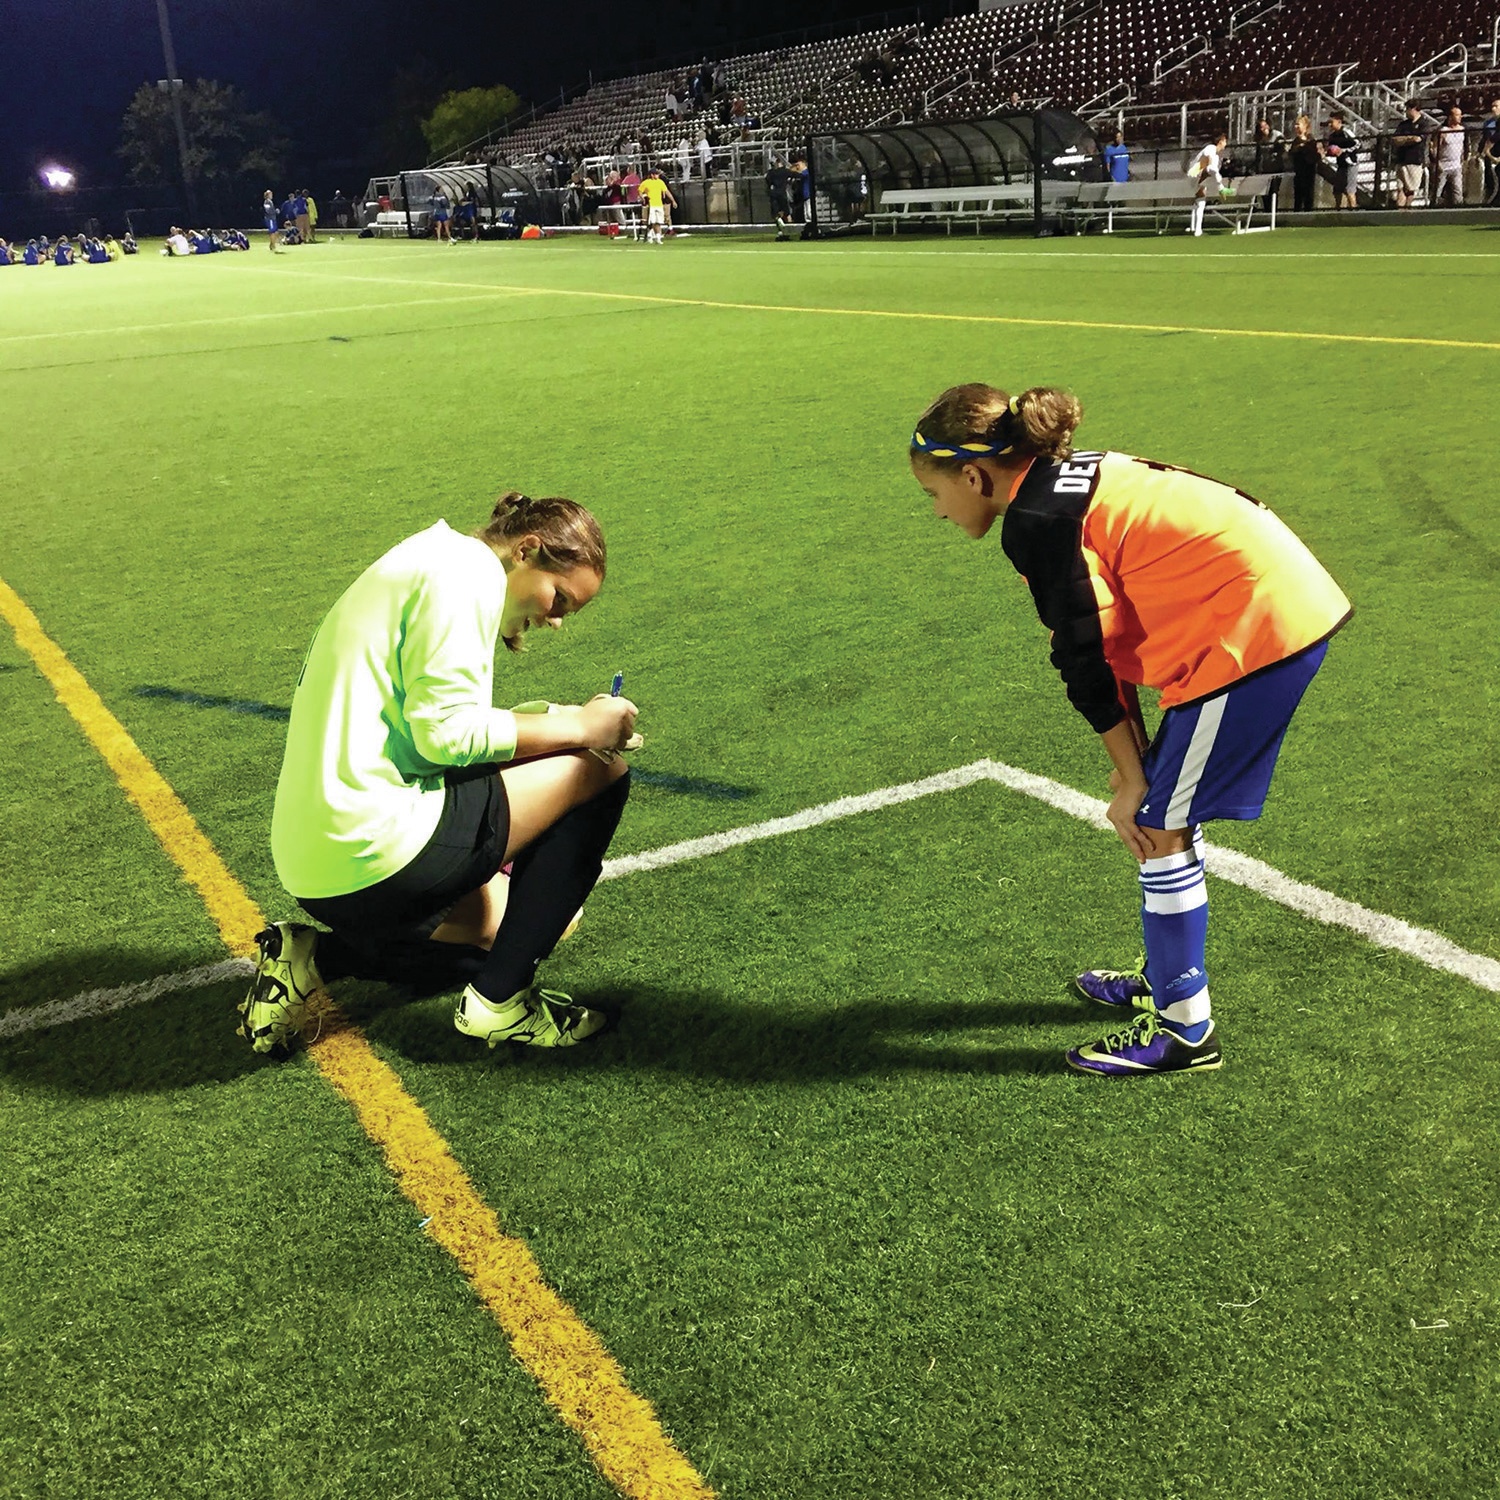 LOCAL HERO - Adelphi University Panthers’ goalkeeper Anne Marie Ulliac signed an autograph for a young fan earlier this year. Ulliac